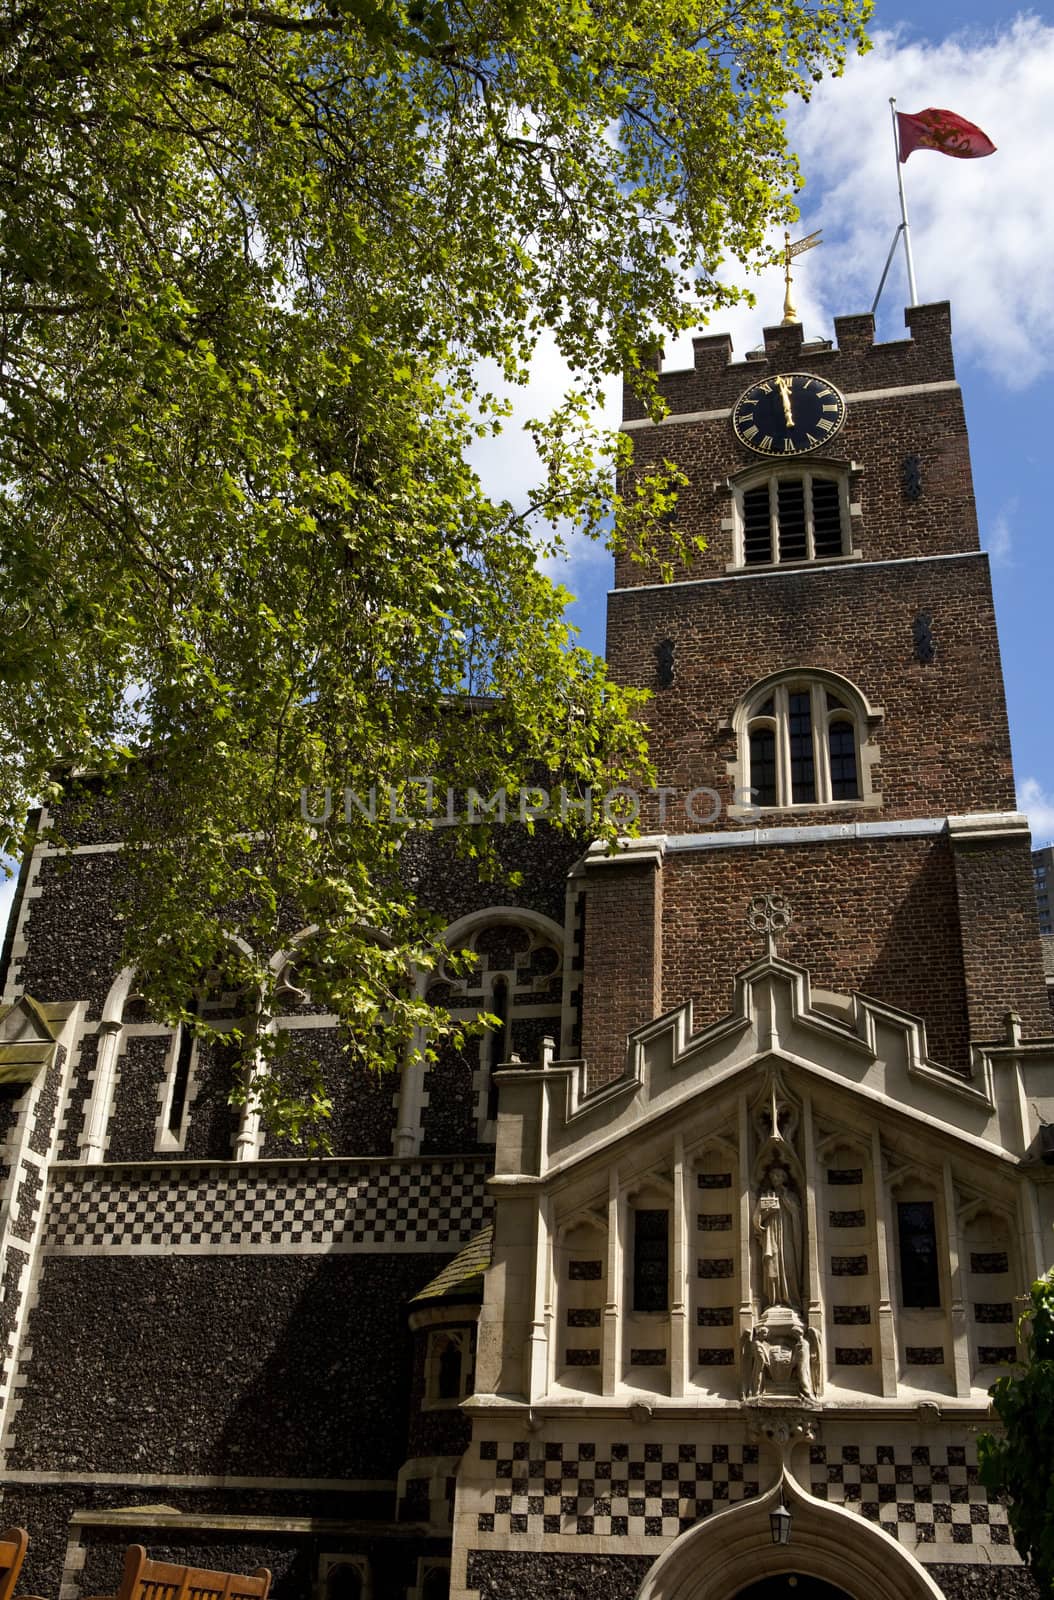 The historic St. Bartholomew-the-Great church in Brabican, London.